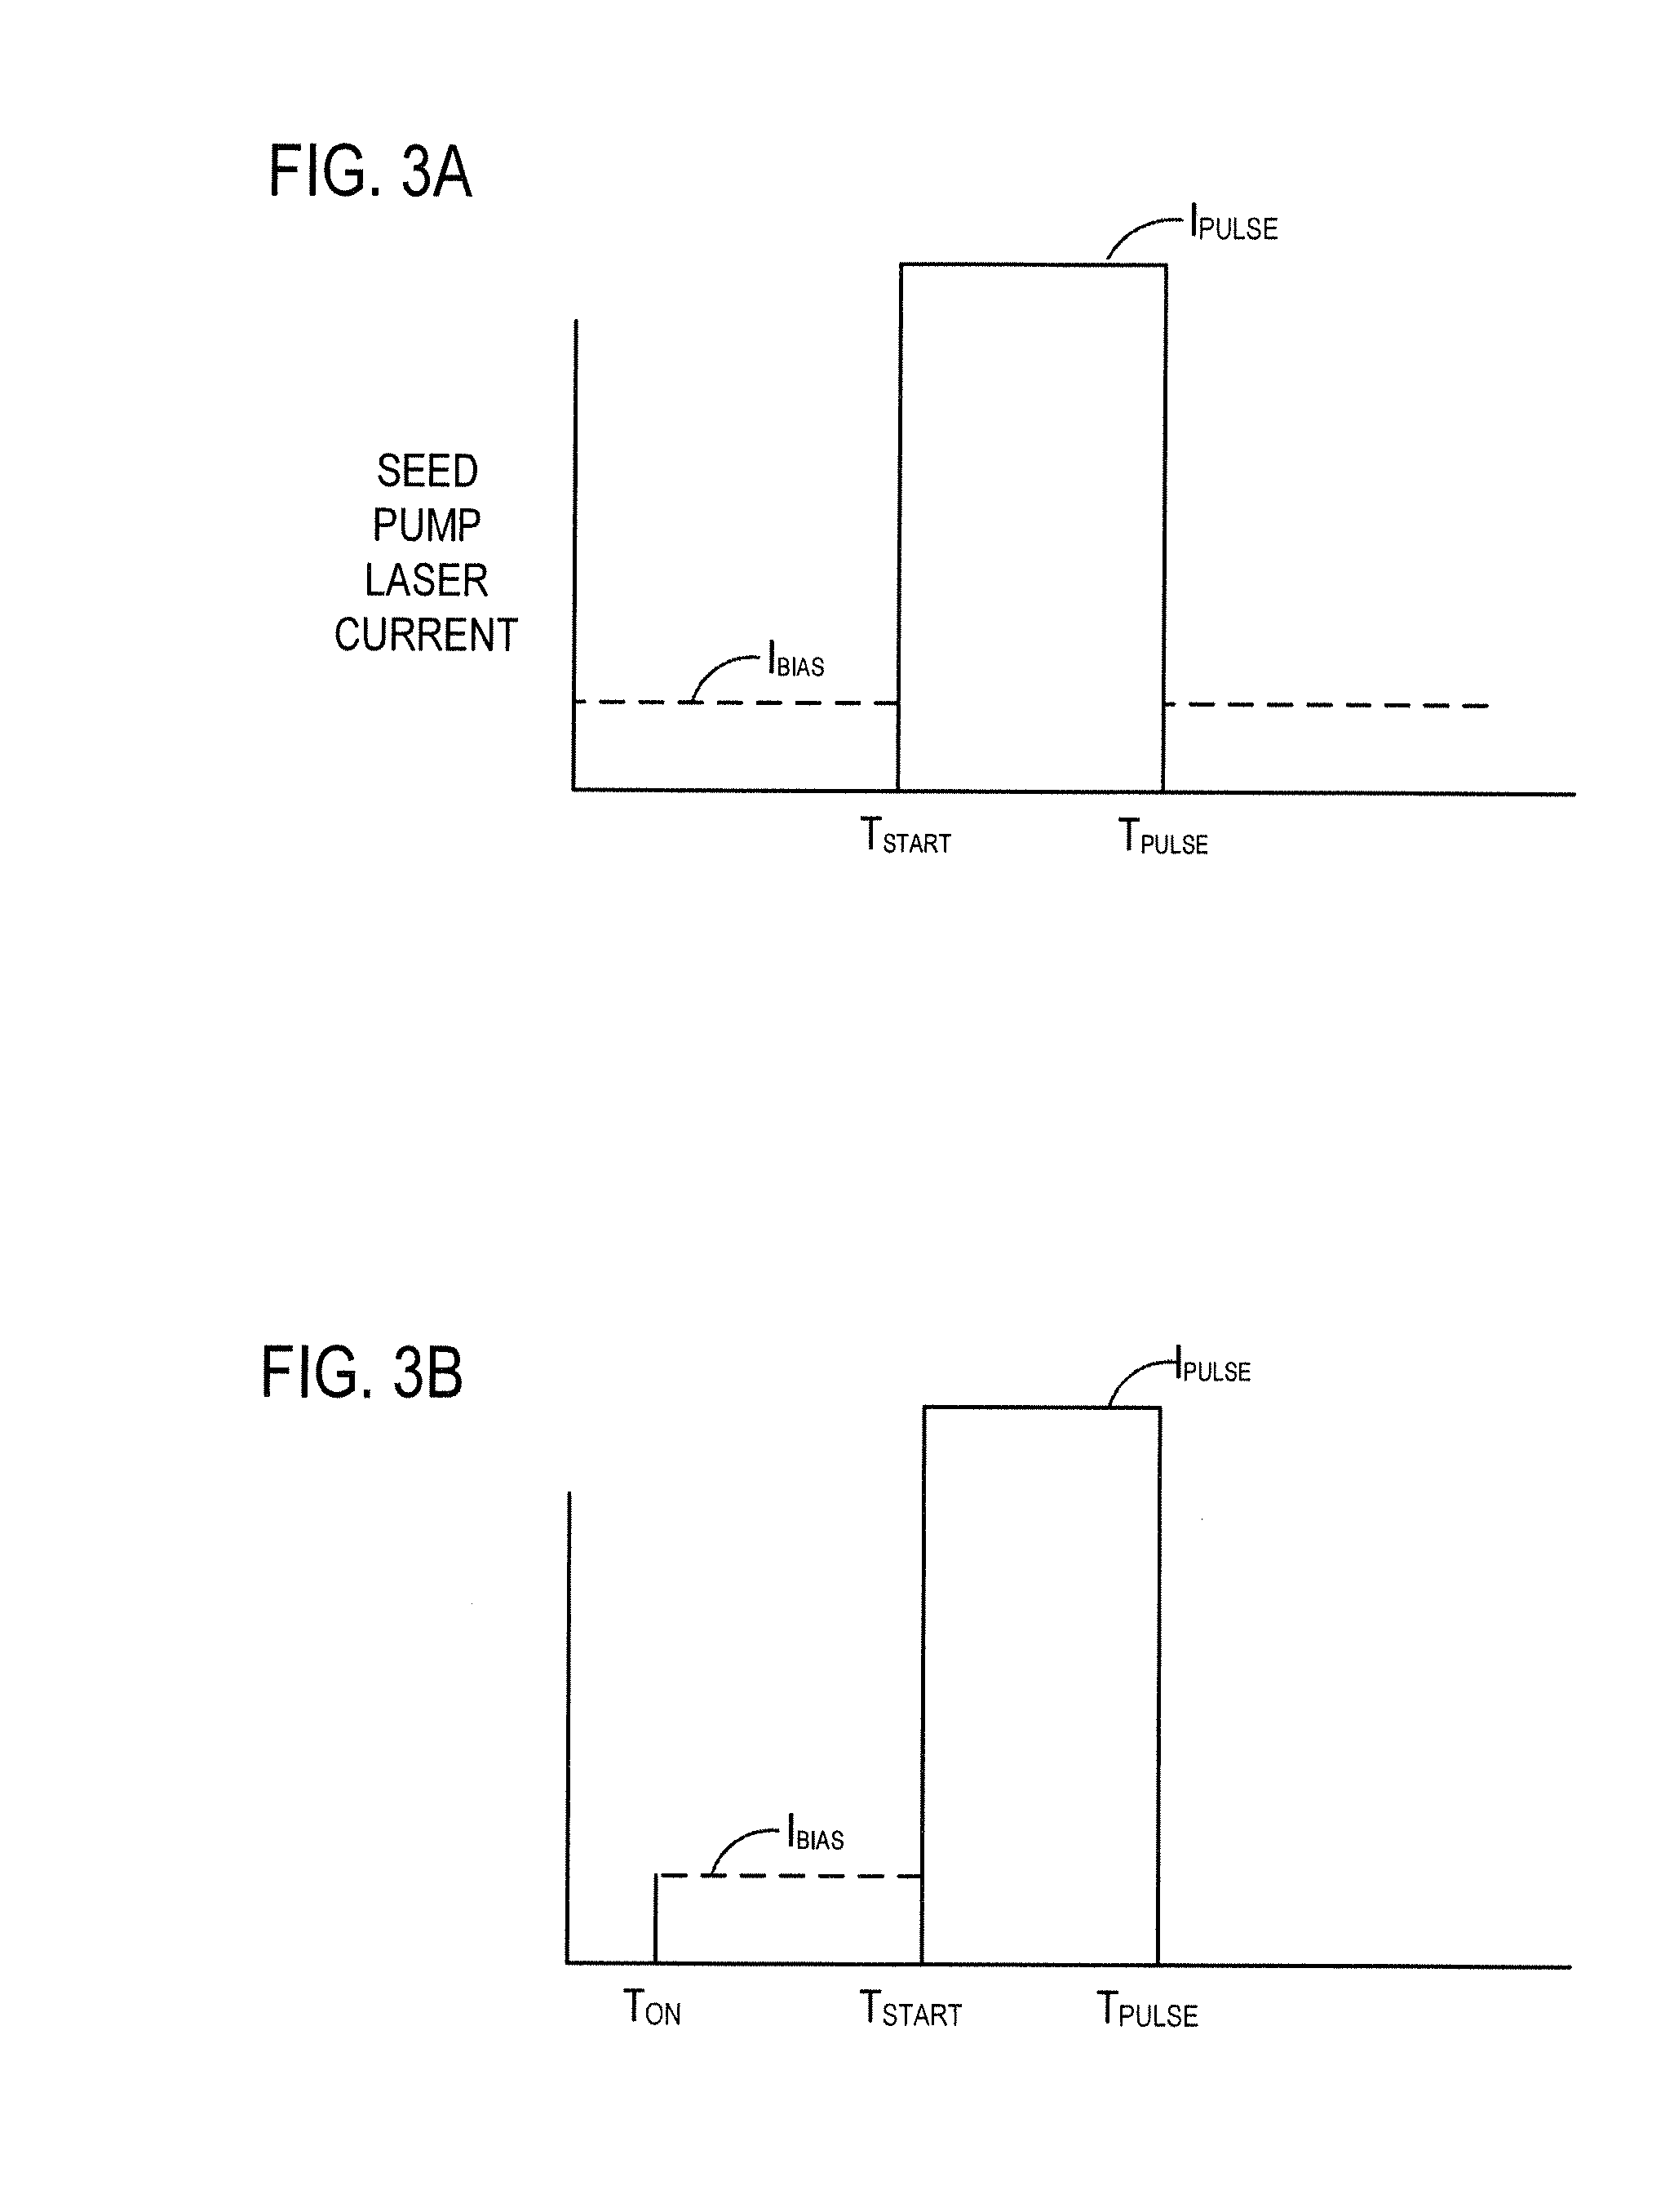 Method for actively controlling the optical output of a seed laser